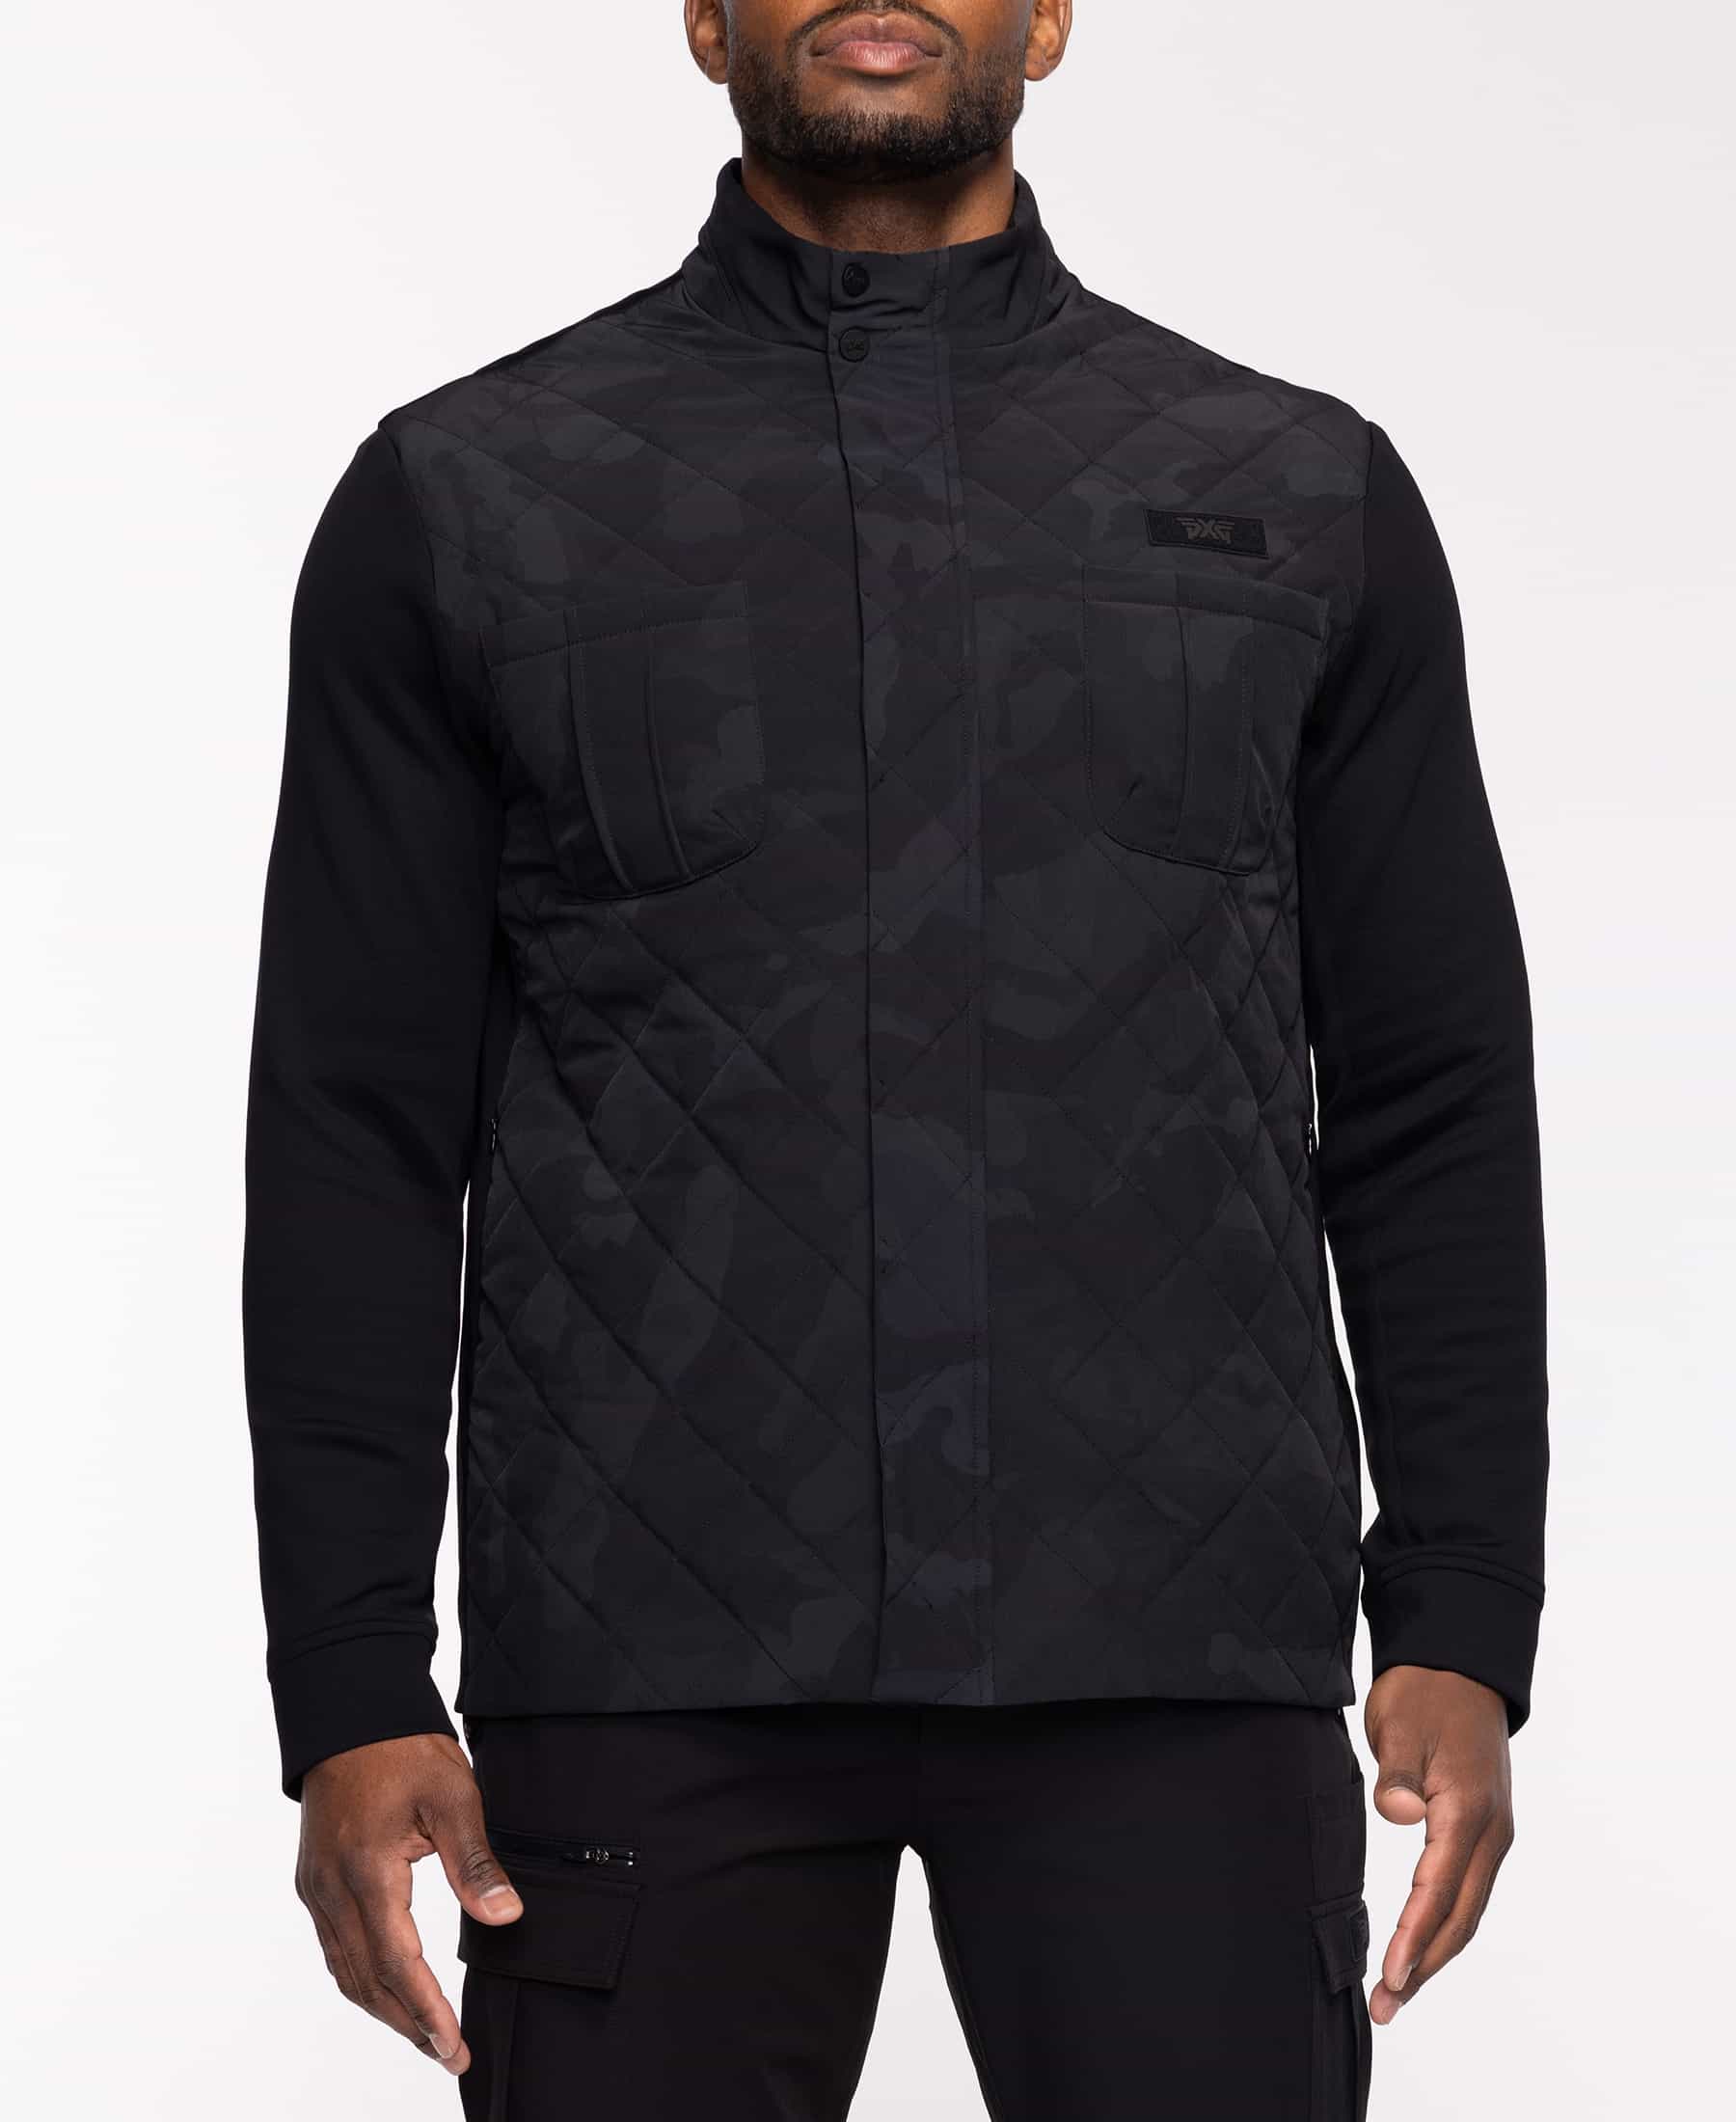 https://www.pxg.com/on/demandware.static/-/Sites-pxg-master/default/dwdcc0b437/images/hi-res/apparel/mens/outerwear/jackets/Quilted%20Fairway%20Camo%20Darkness%20Hybrid%20Jacket/Mens-Quilted-Fairway-Camo-Darkness-Hybrid-Jacket-Front-HiRes-50.jpg